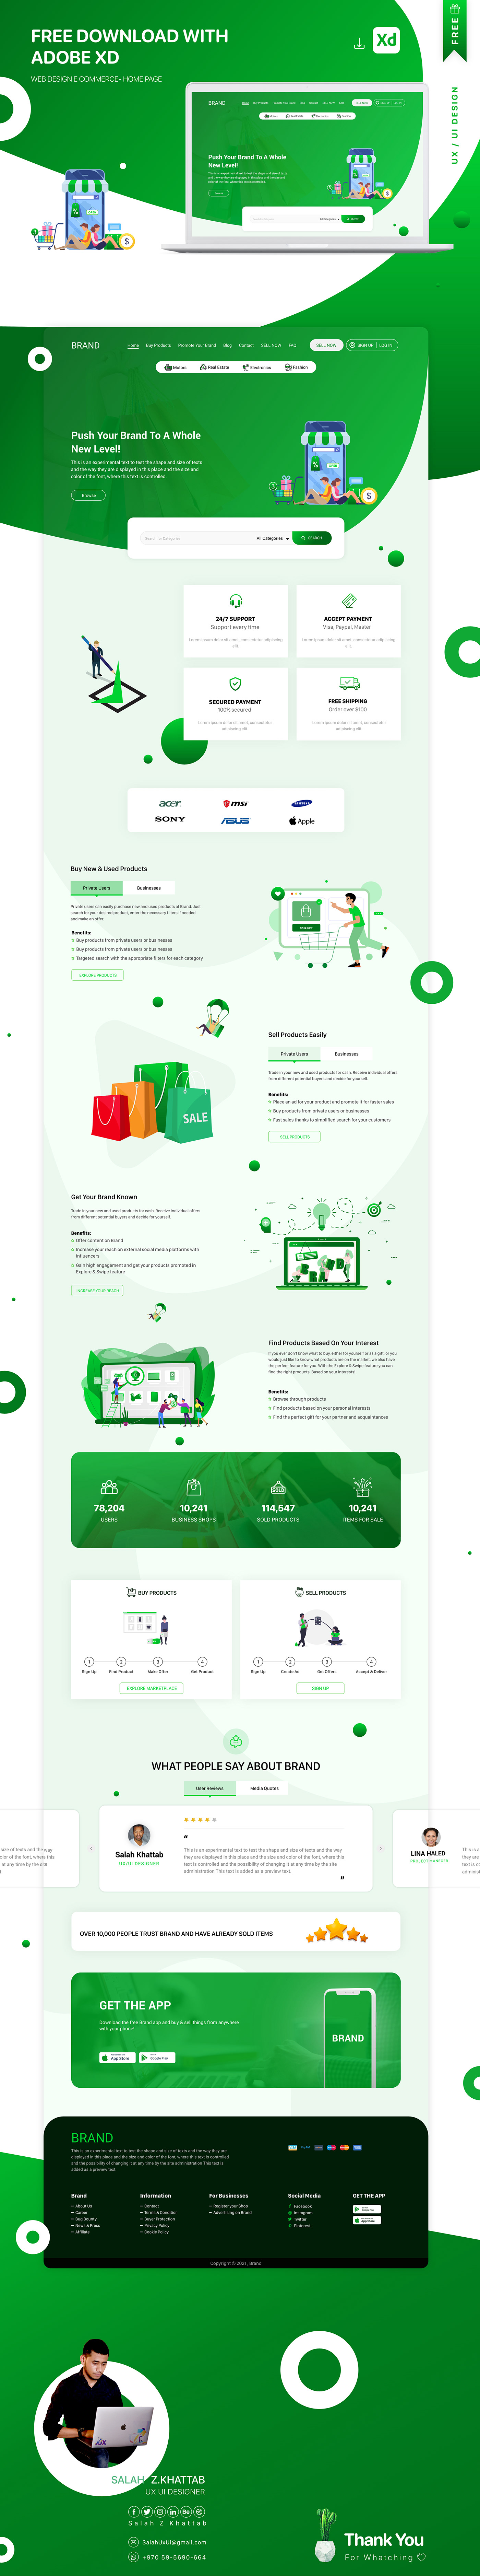 Adobe XD Ecommerce free download Free Template template template adobe xd template web design Web Design  web design ecommerce